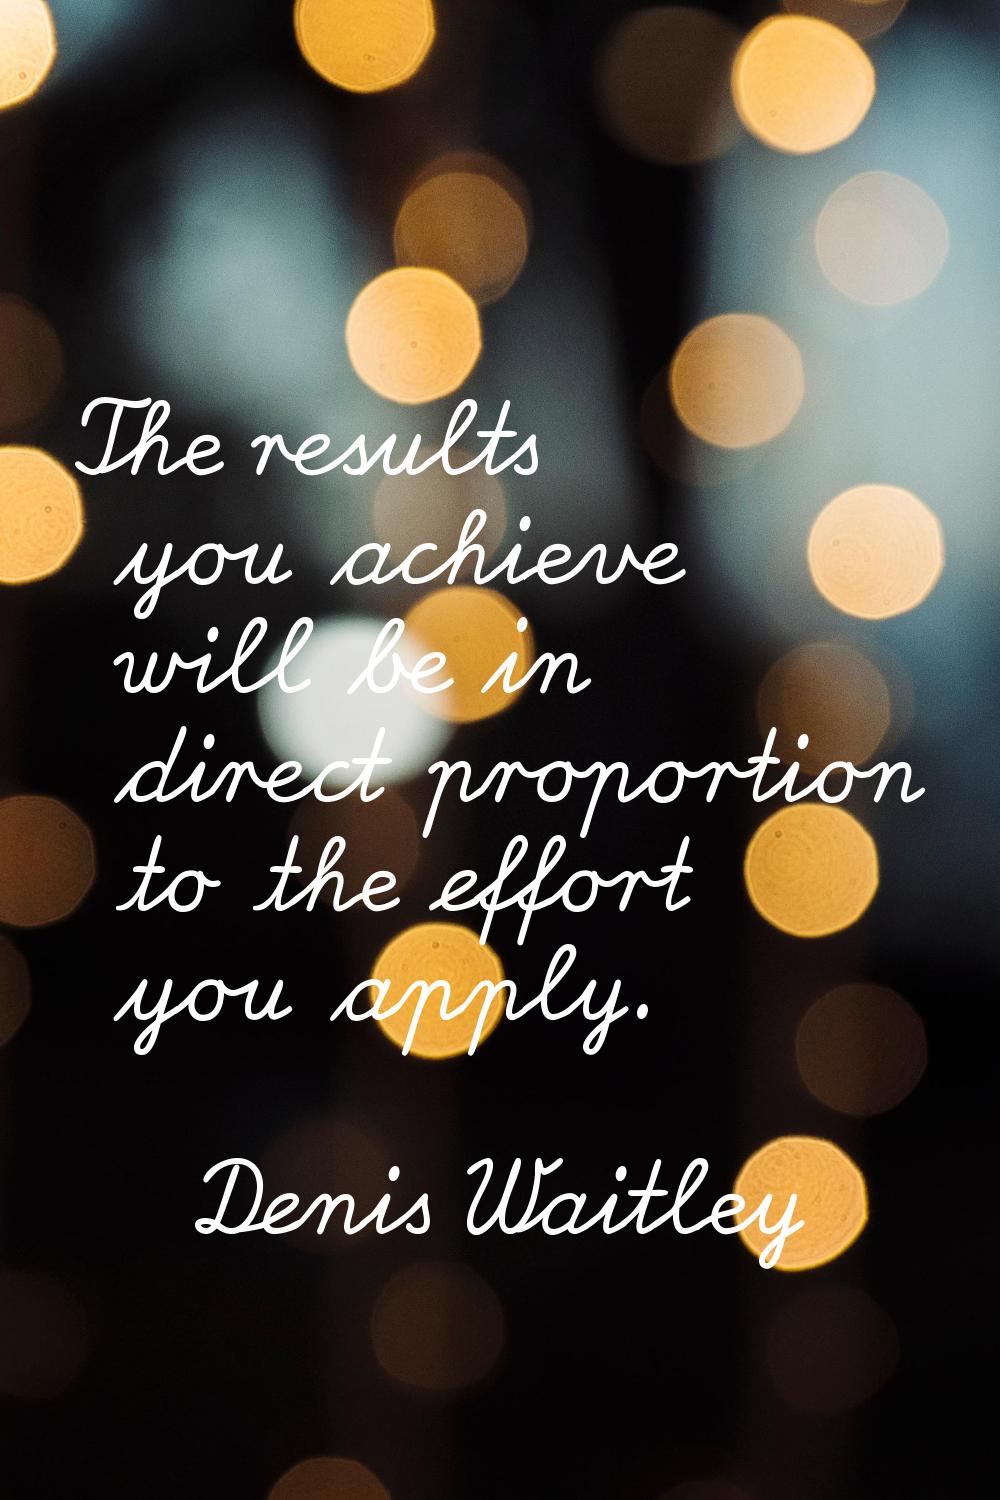 The results you achieve will be in direct proportion to the effort you apply.